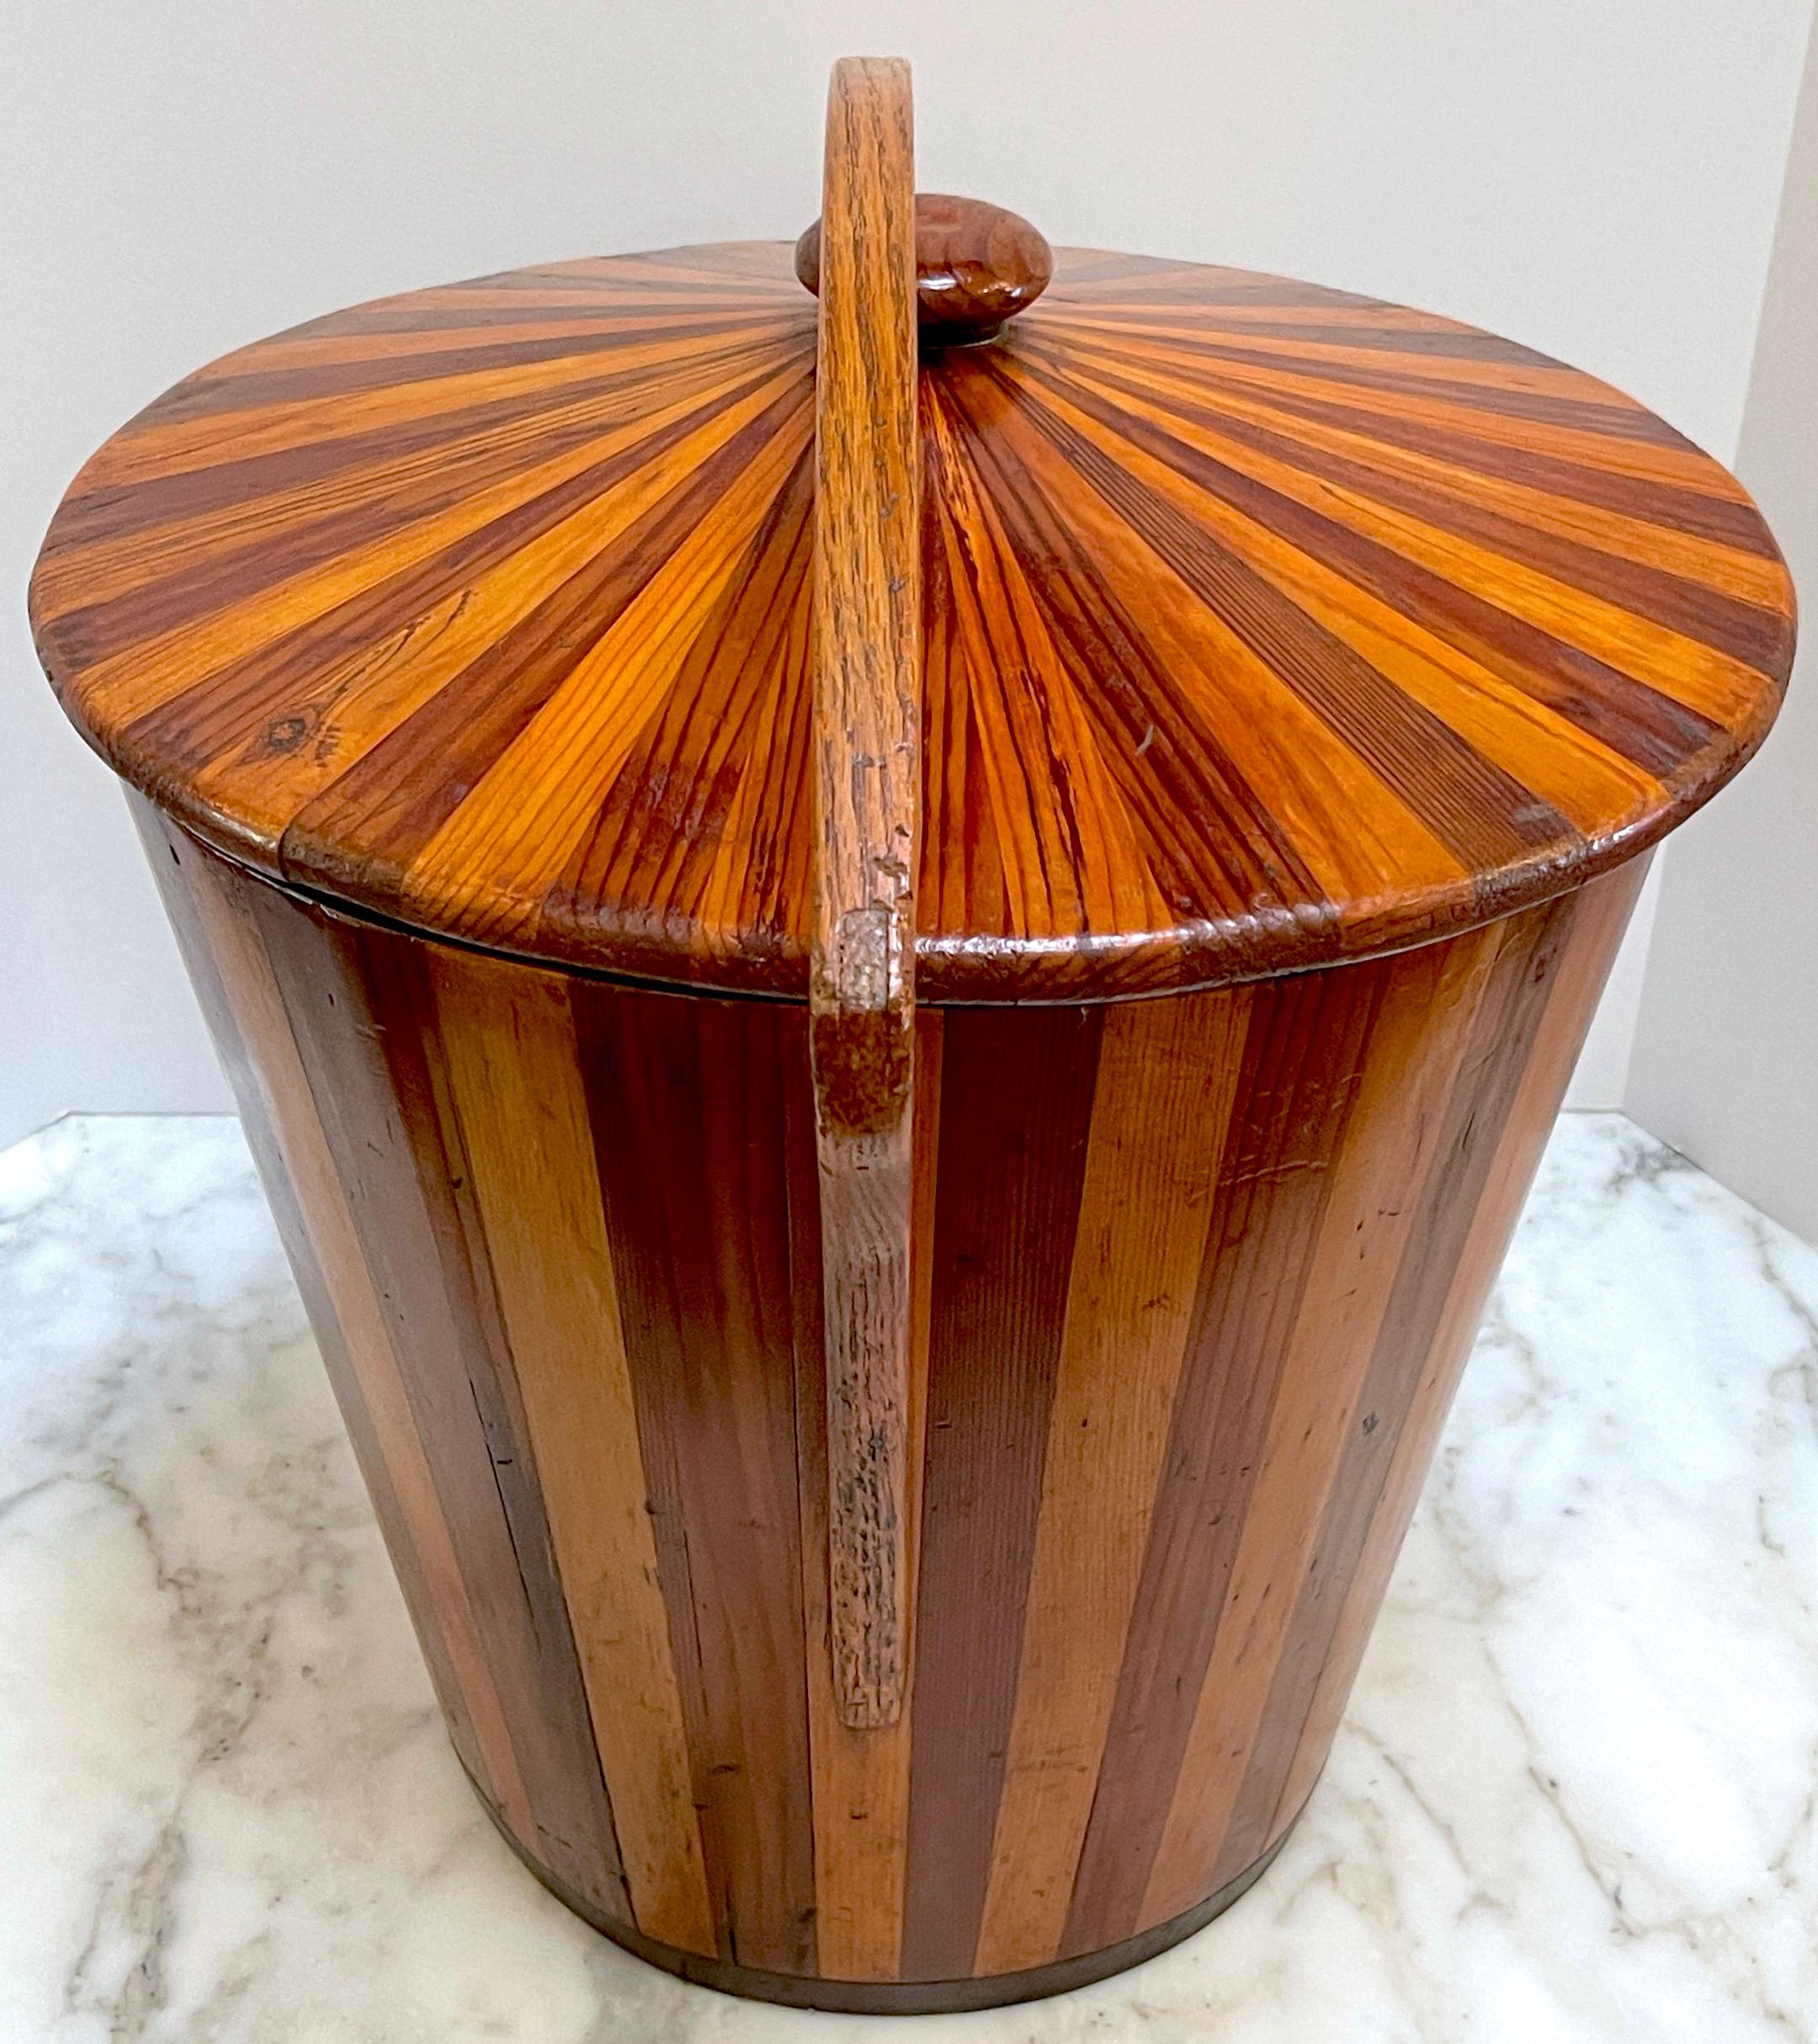 20th Century American Modernist Geometric  Inlaid Two-Tone Wood Lidded Bucket /Vessel, 1950s  For Sale